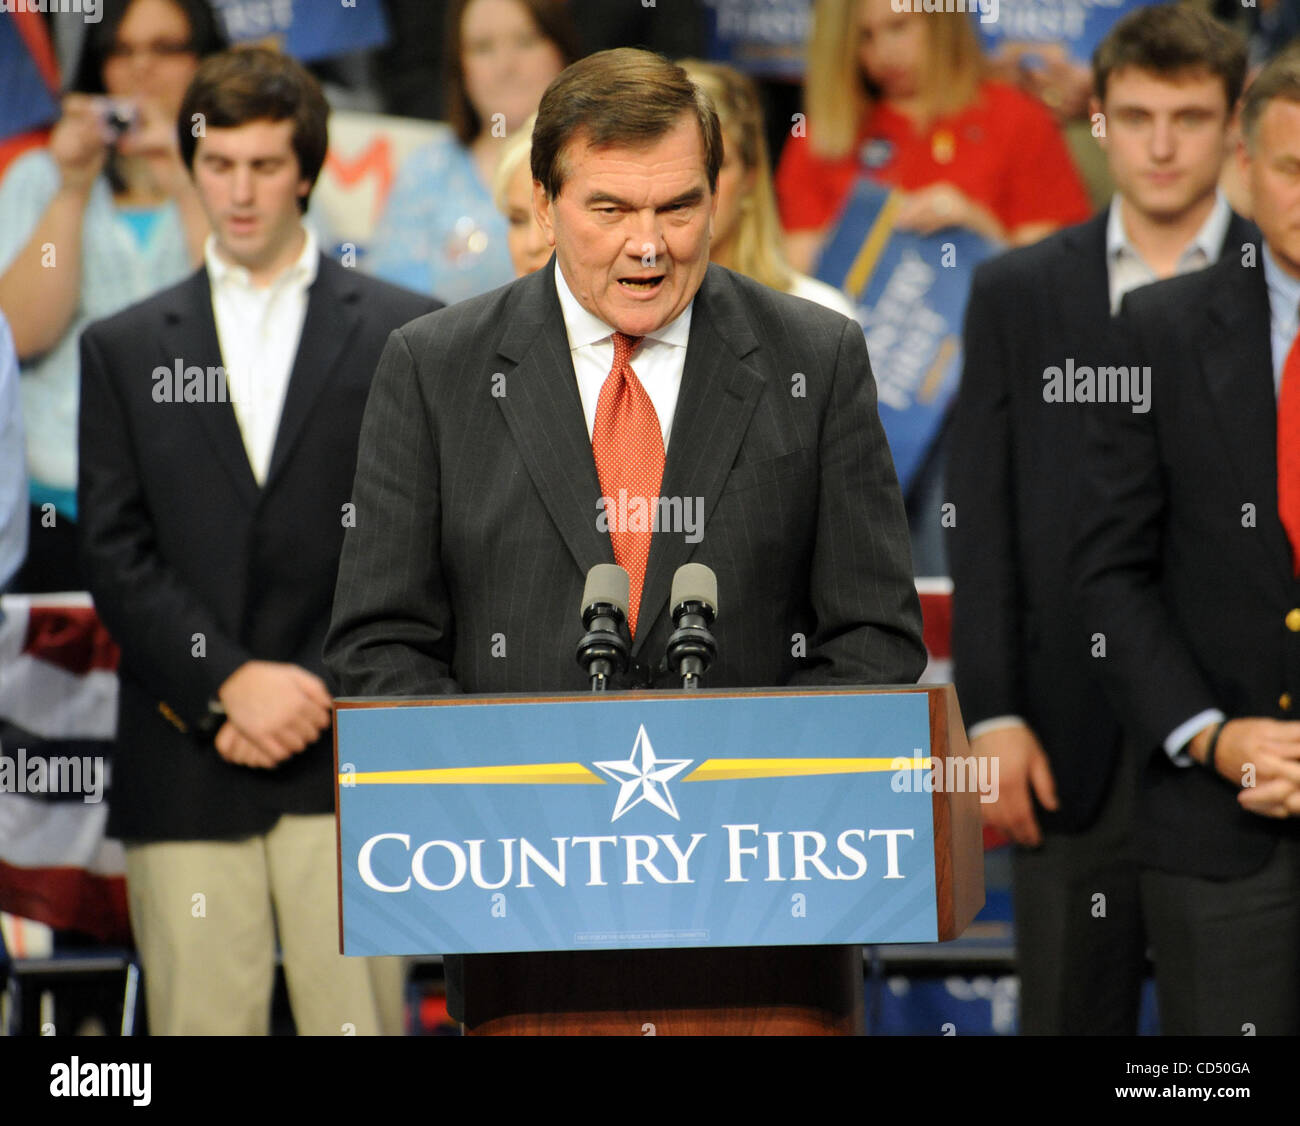 Oct 28, 2008 - Fayetteville, North Carolina; USA - Former Governor TOM RIDGE makes an appearance as Republican Presidential Candidate Senator John McCain makes a campaign stop to over 10, 000 supporters at the Crown Coliseum located in North Carolina.  Copyright 2008 Jason Moore. Mandatory Credit: J Stock Photo